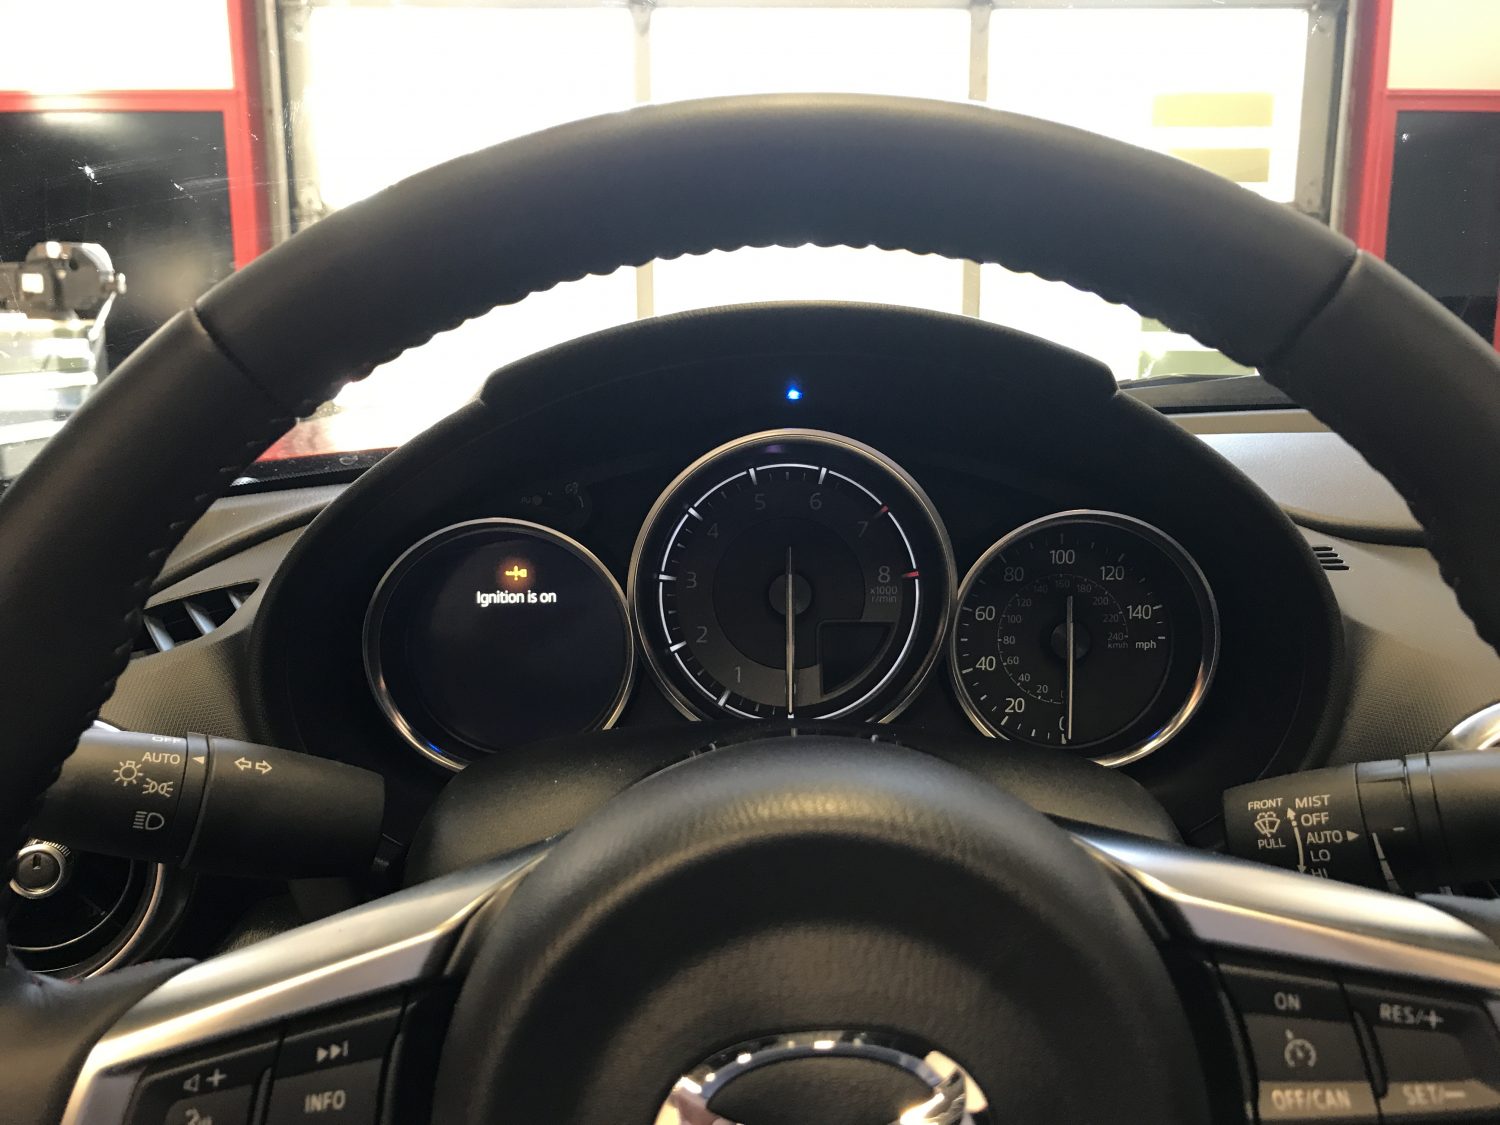 Custom K40 Hidden LEDs in Instrument Cluster Installed on a 2017 Mazda MX5 in Milford, CT